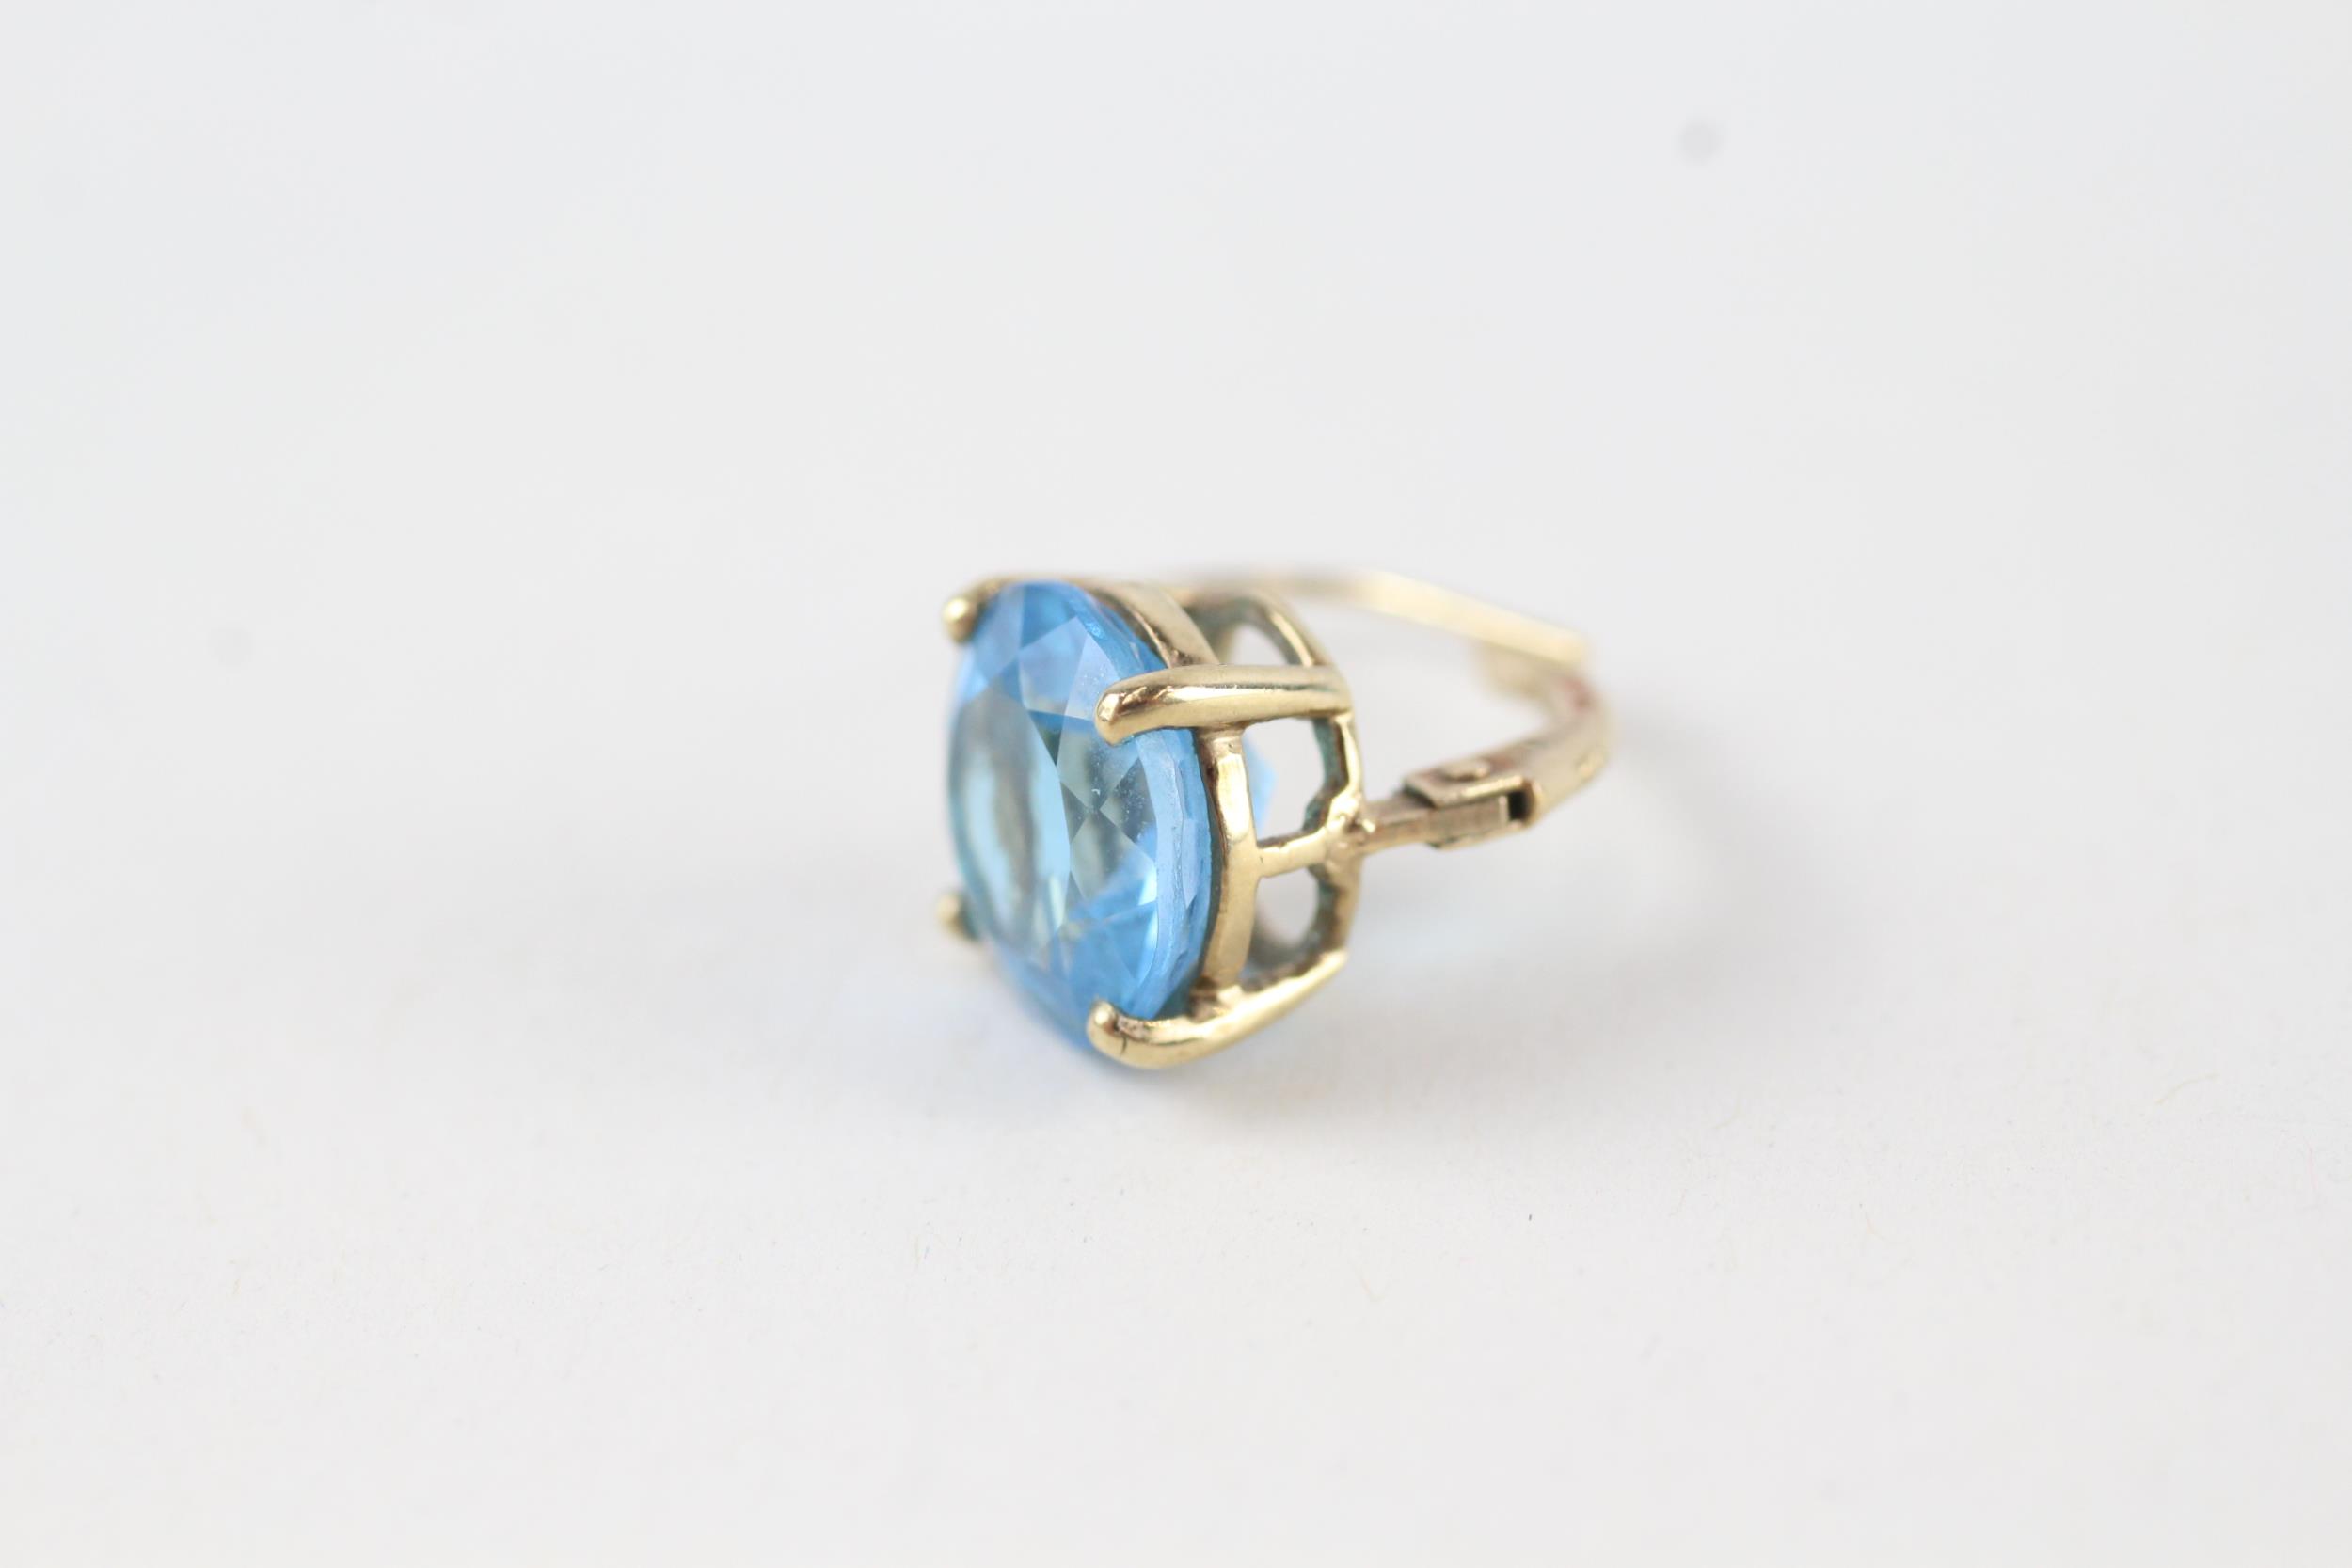 9ct gold blue topaz leverback earrings (3.7g) - Image 3 of 4